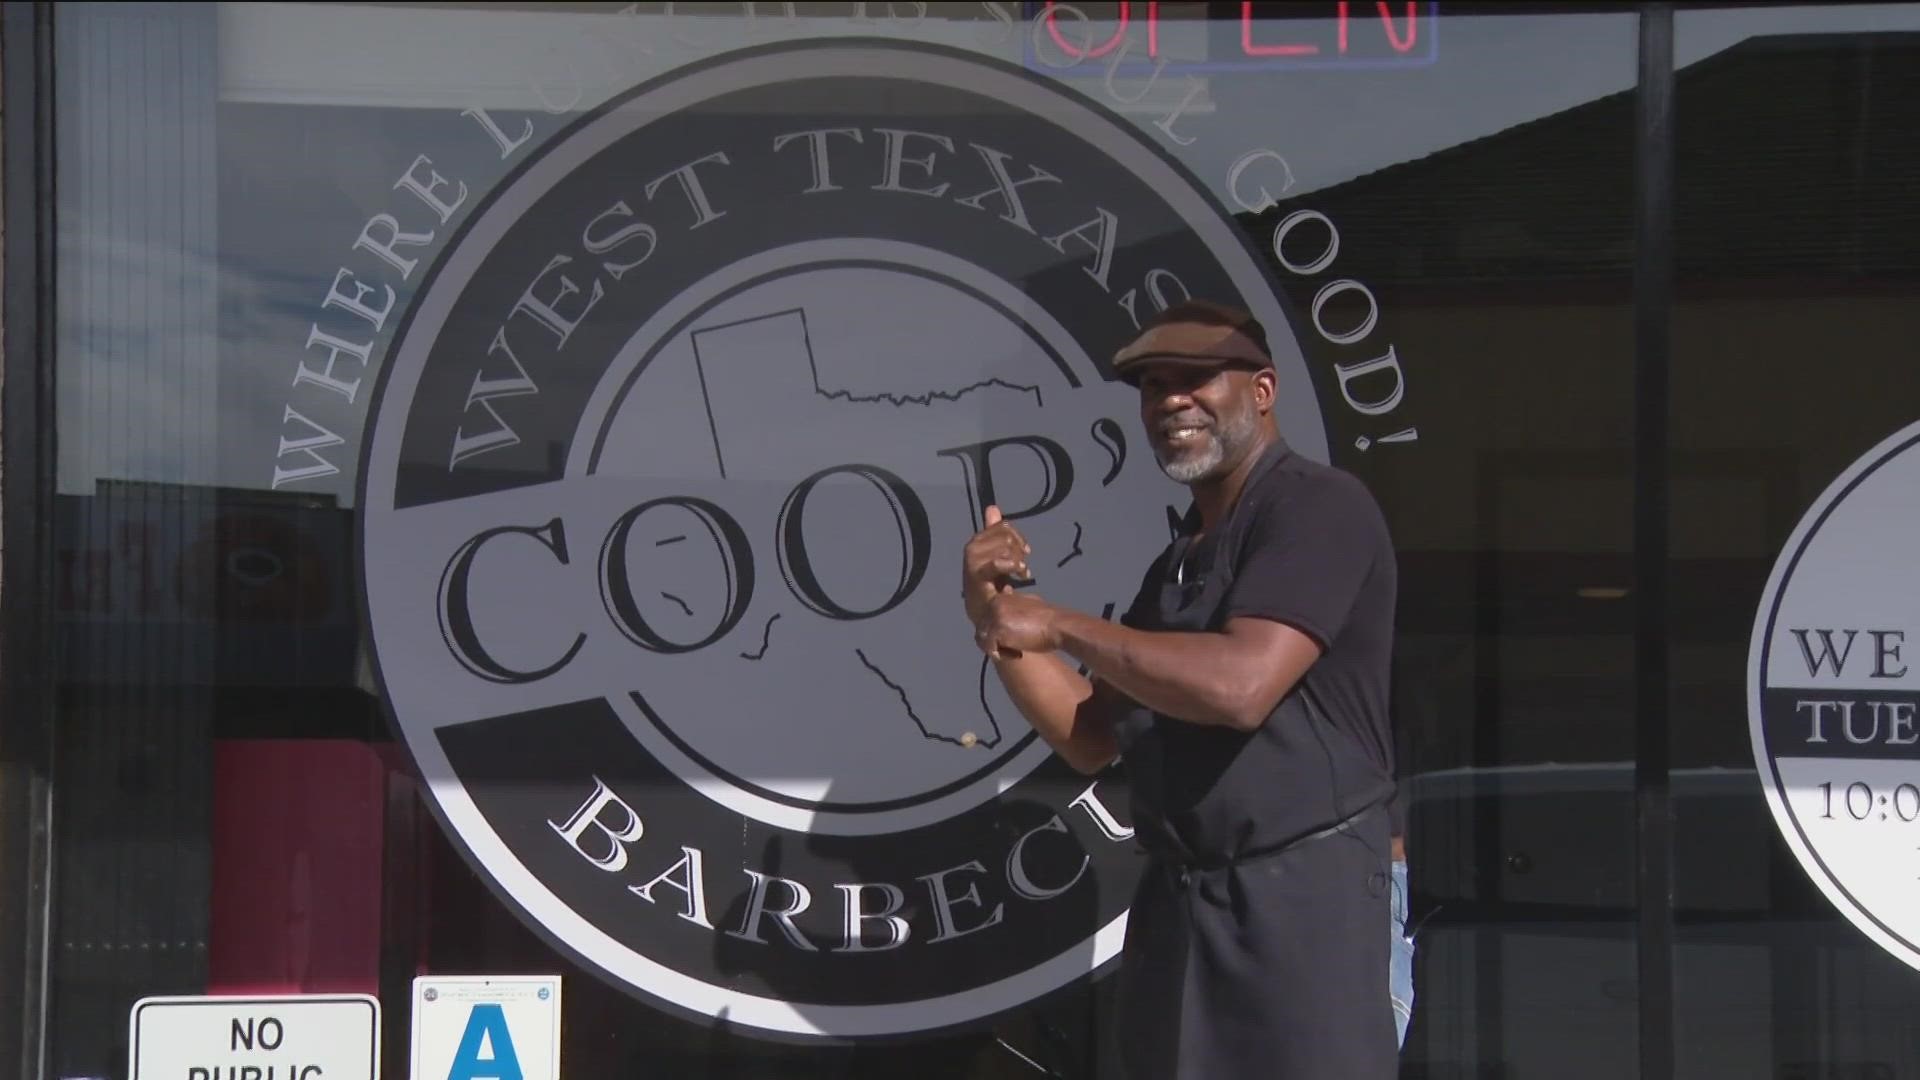 Coop’s West Texas BBQ is in Lemon Grove and this Black-owned restaurant serves brisket, pork, and jerk chicken which takes hours to prepare and cook.